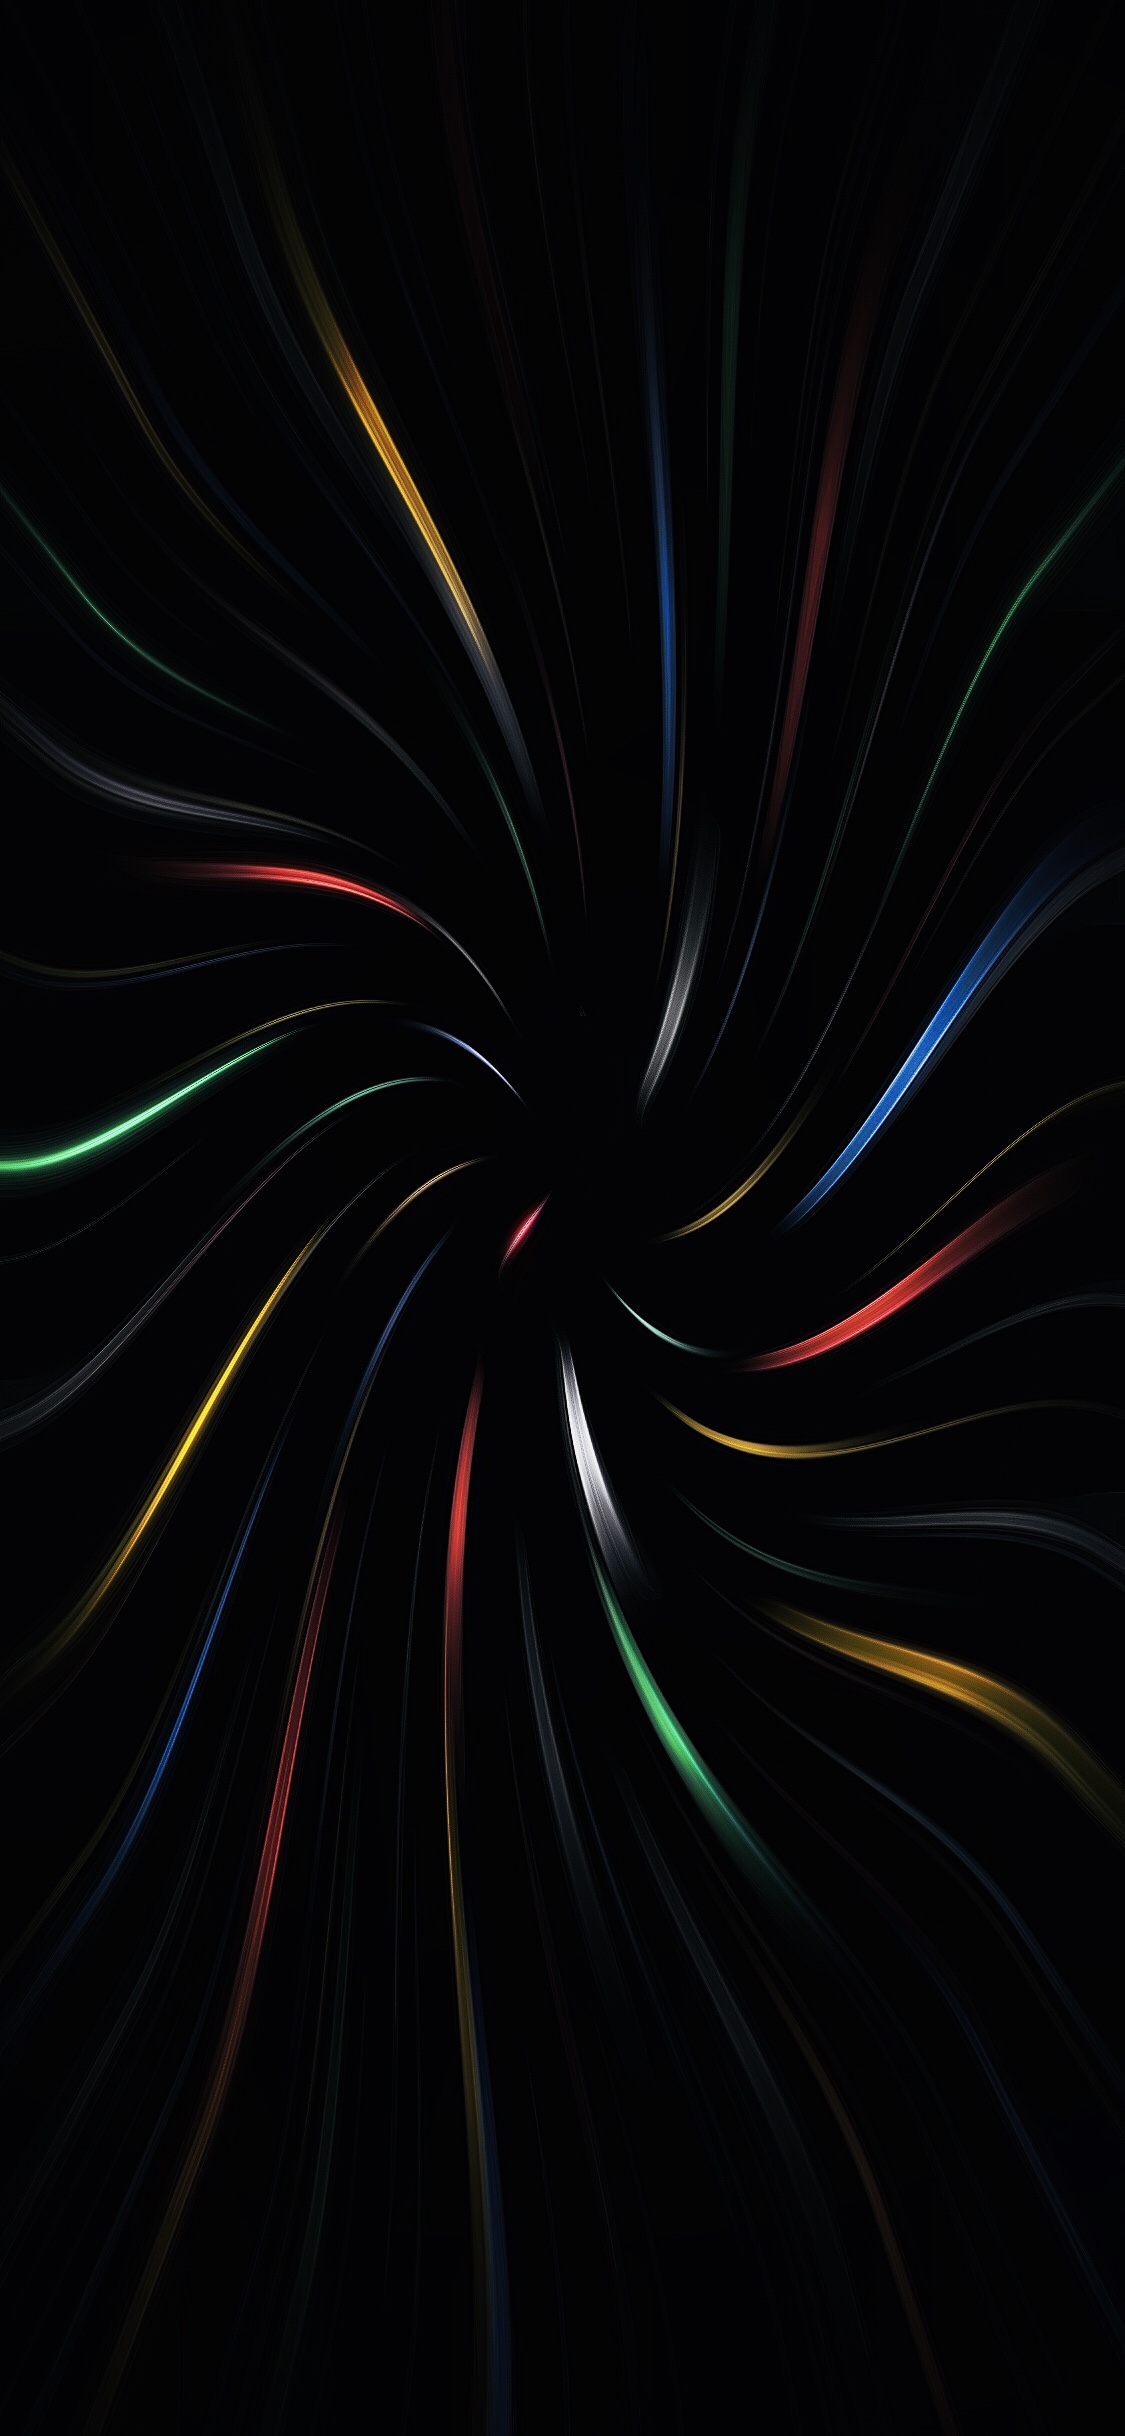 iPhone Amoled Black Abstract Wallpapers - Wallpaper Cave